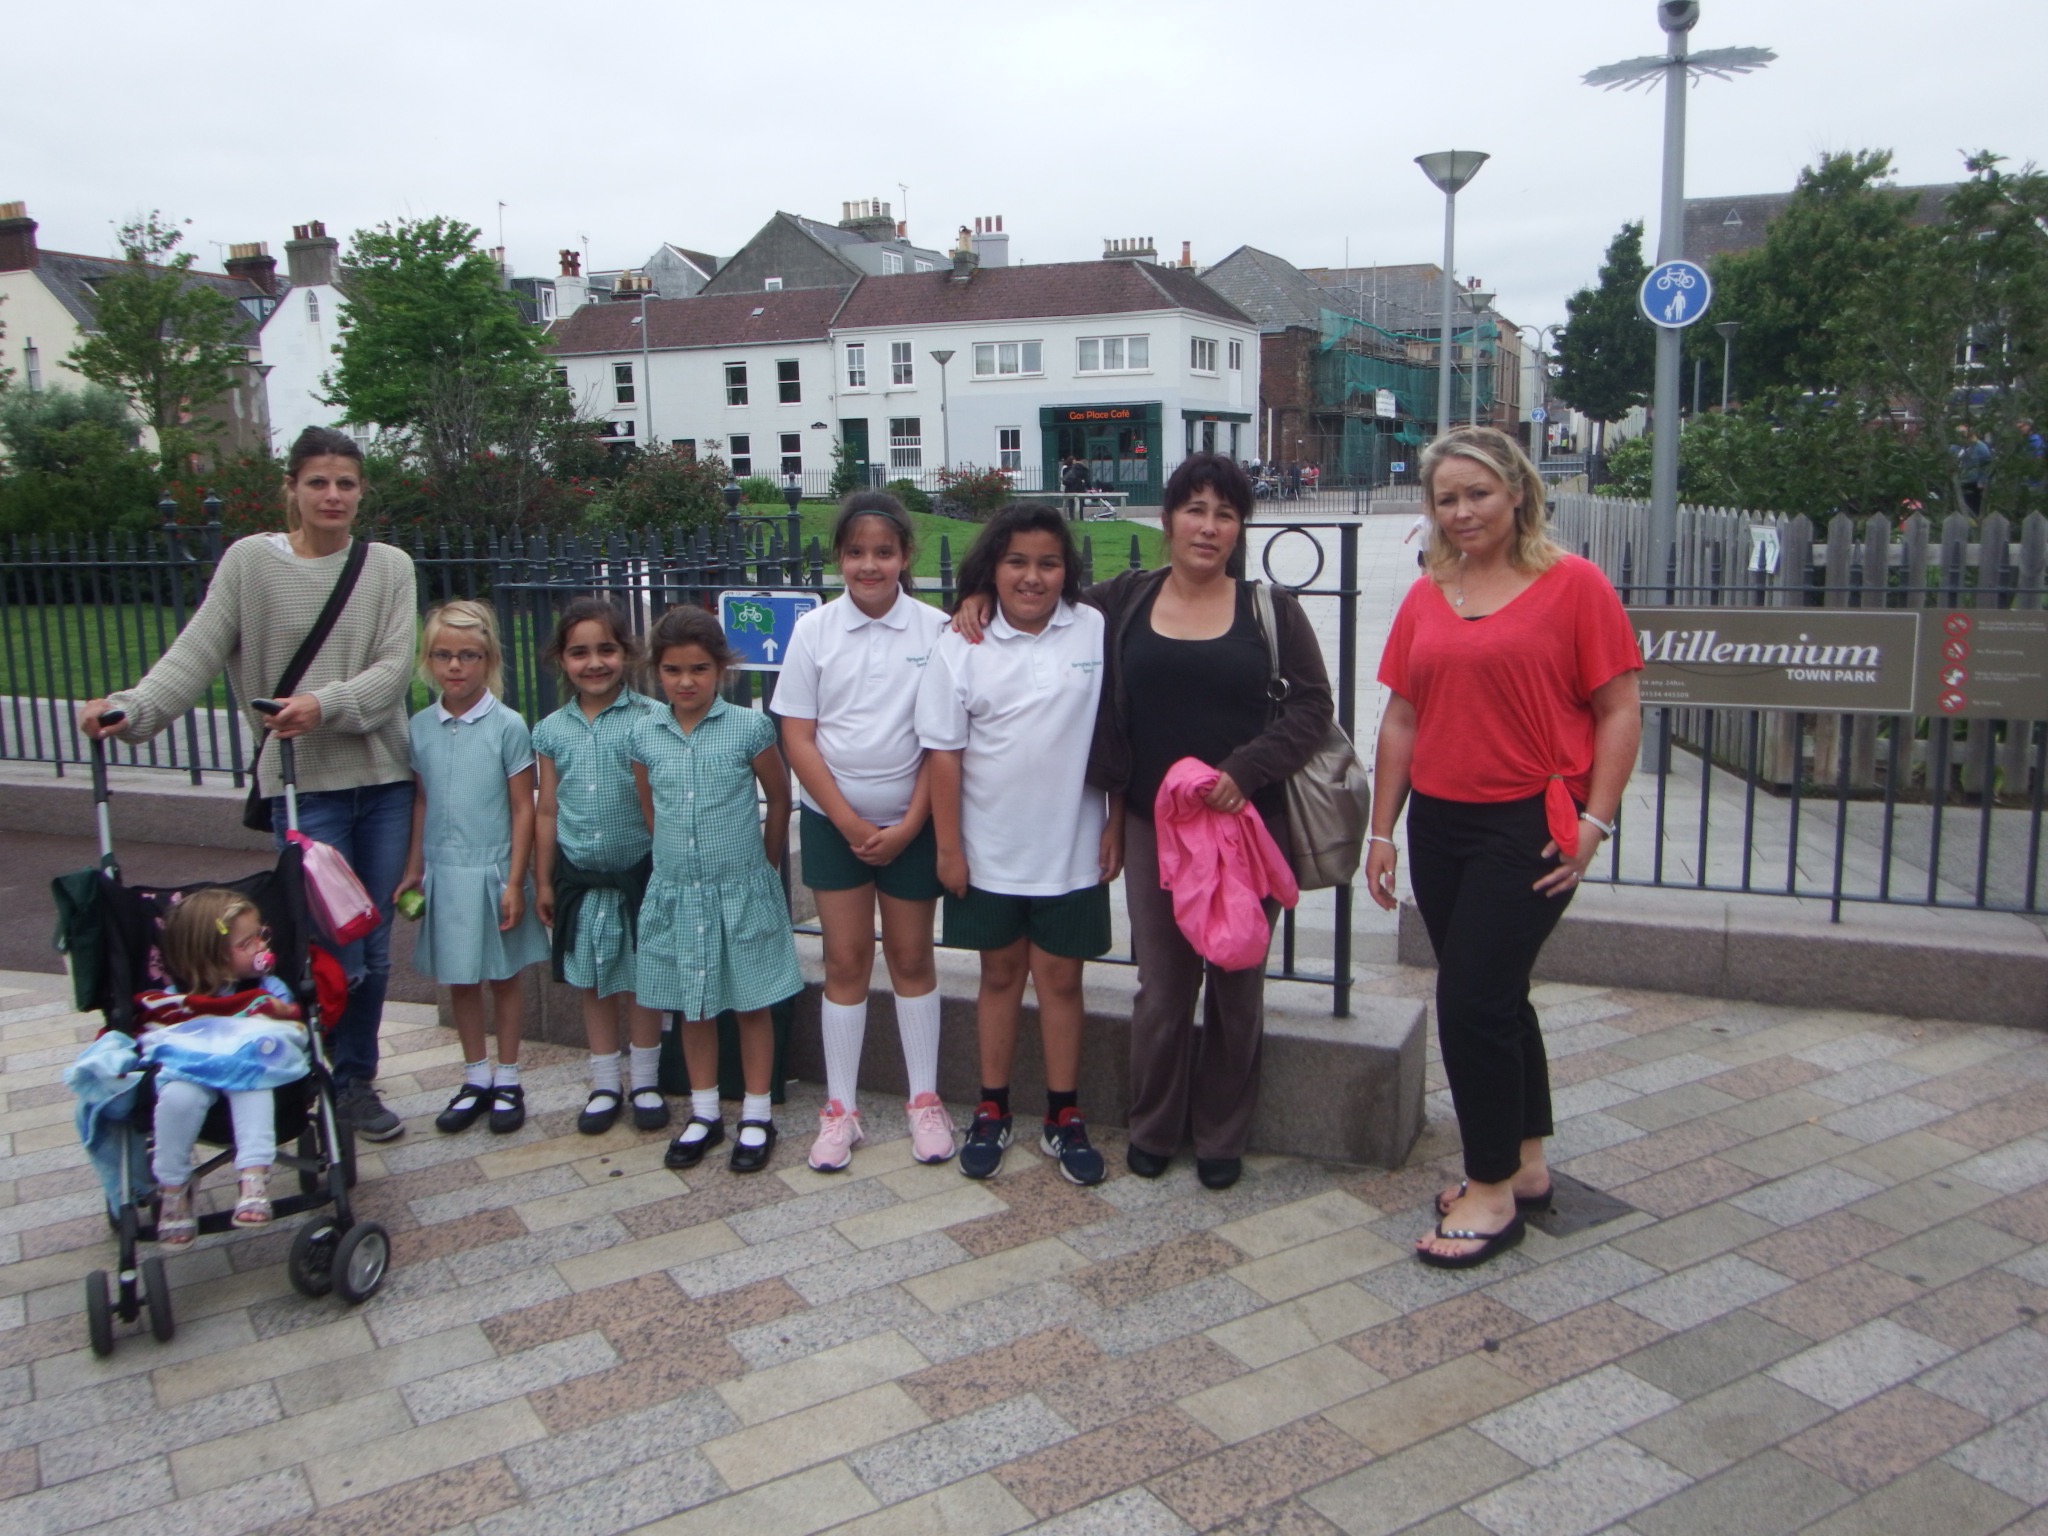 Petitioners with Nicola McAteer (far right) at the Millennium Town Park 